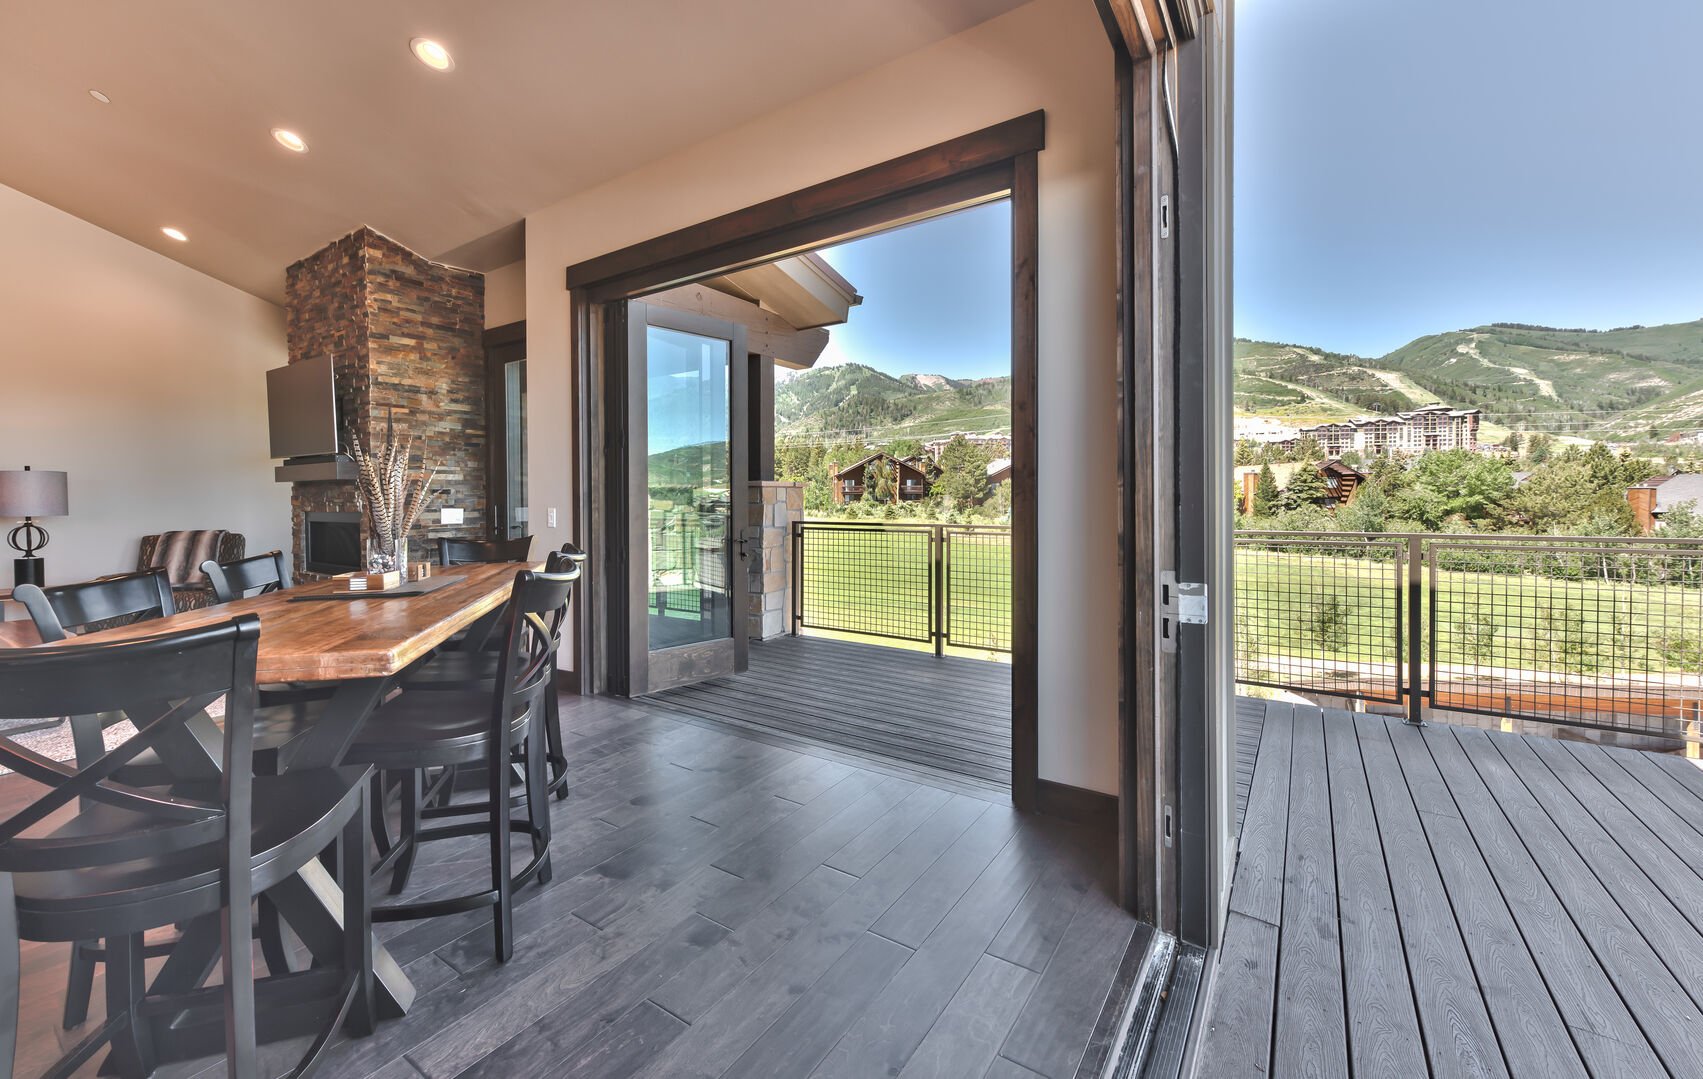 Accordion doors open on two sides to enjoy the spectacular Park City summer and fall